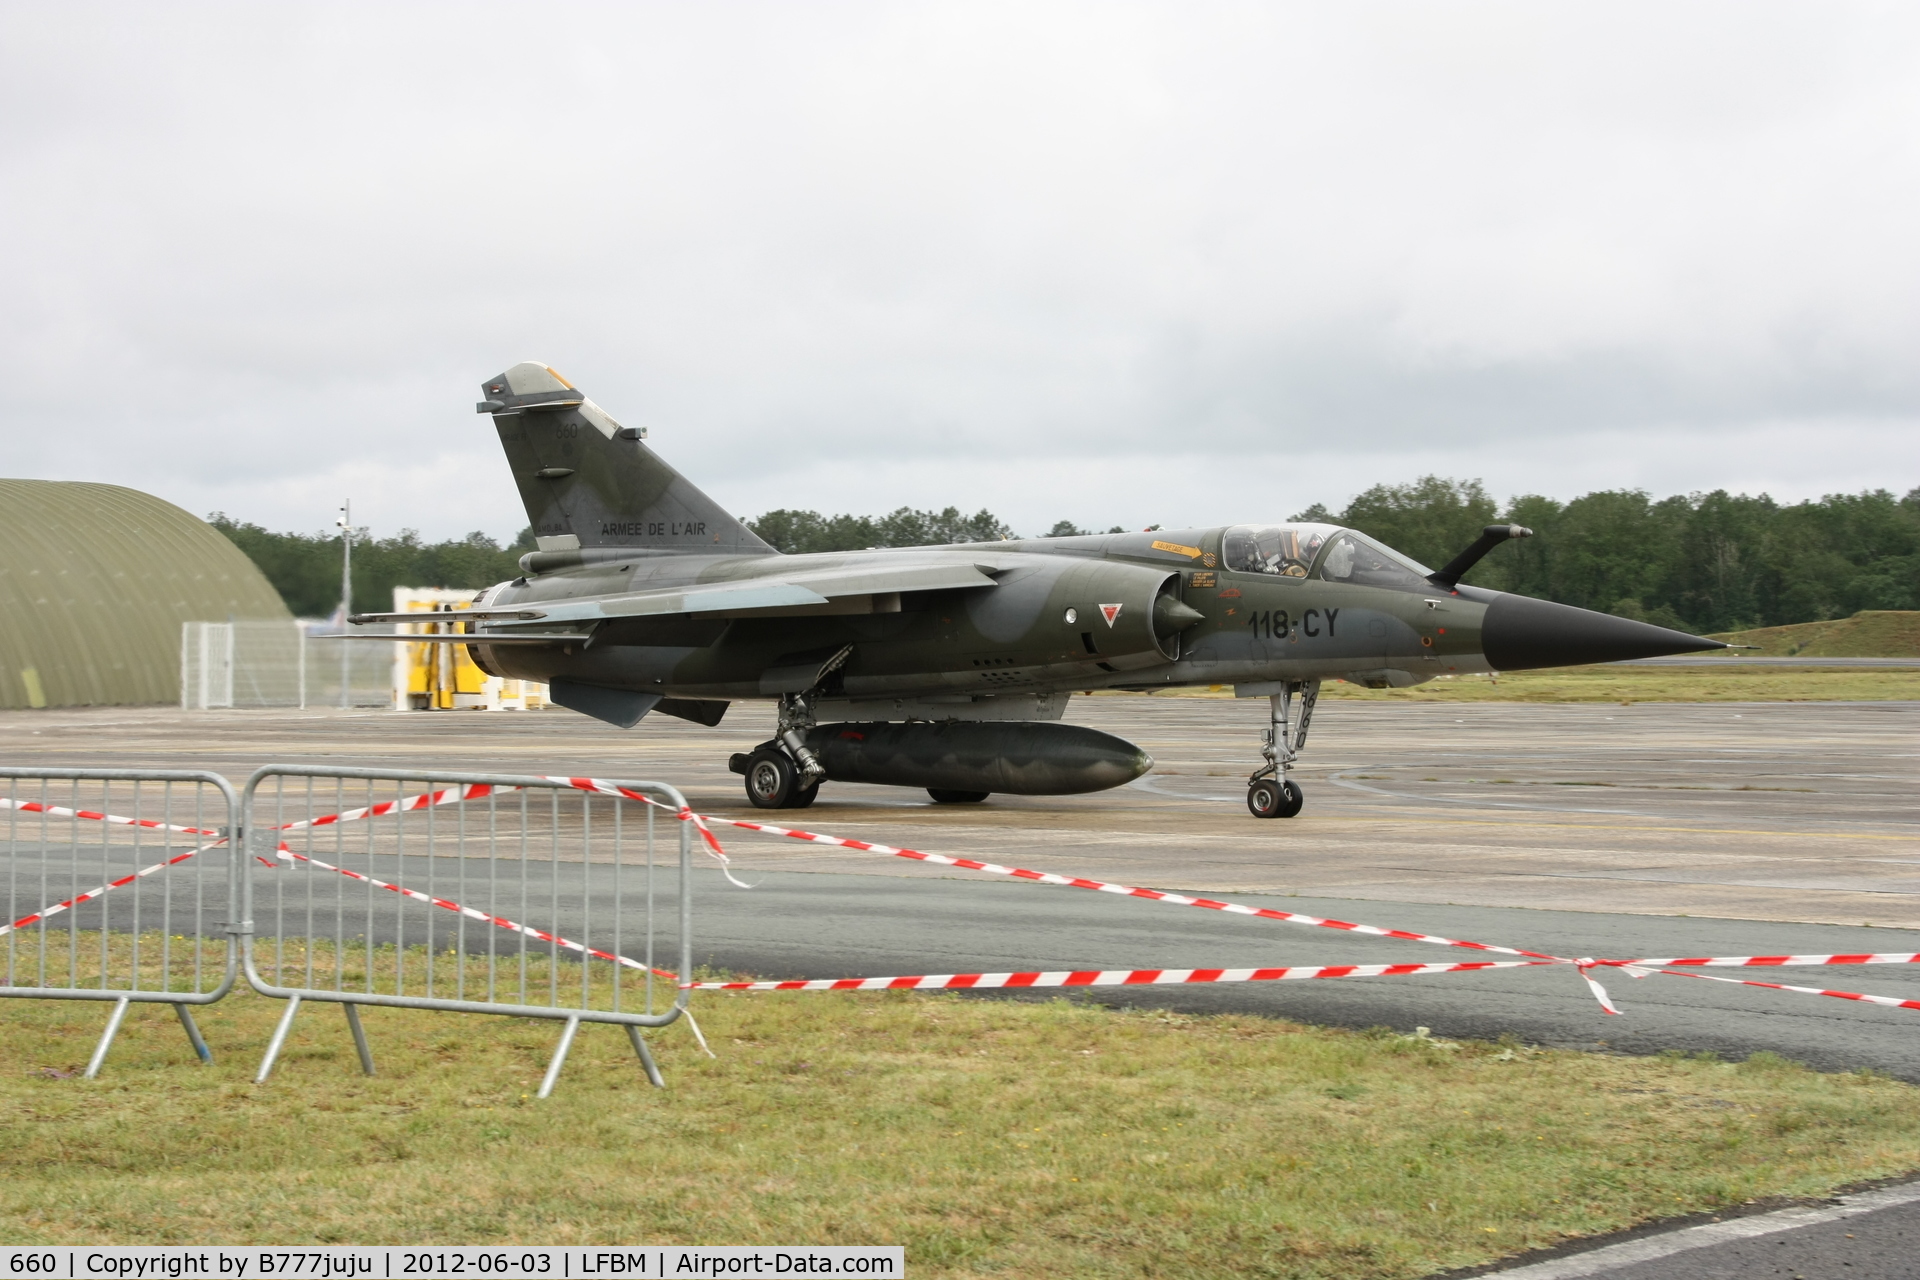 660, Dassault Mirage F.1CR C/N 660, at Mont de masant with new code 118-CY